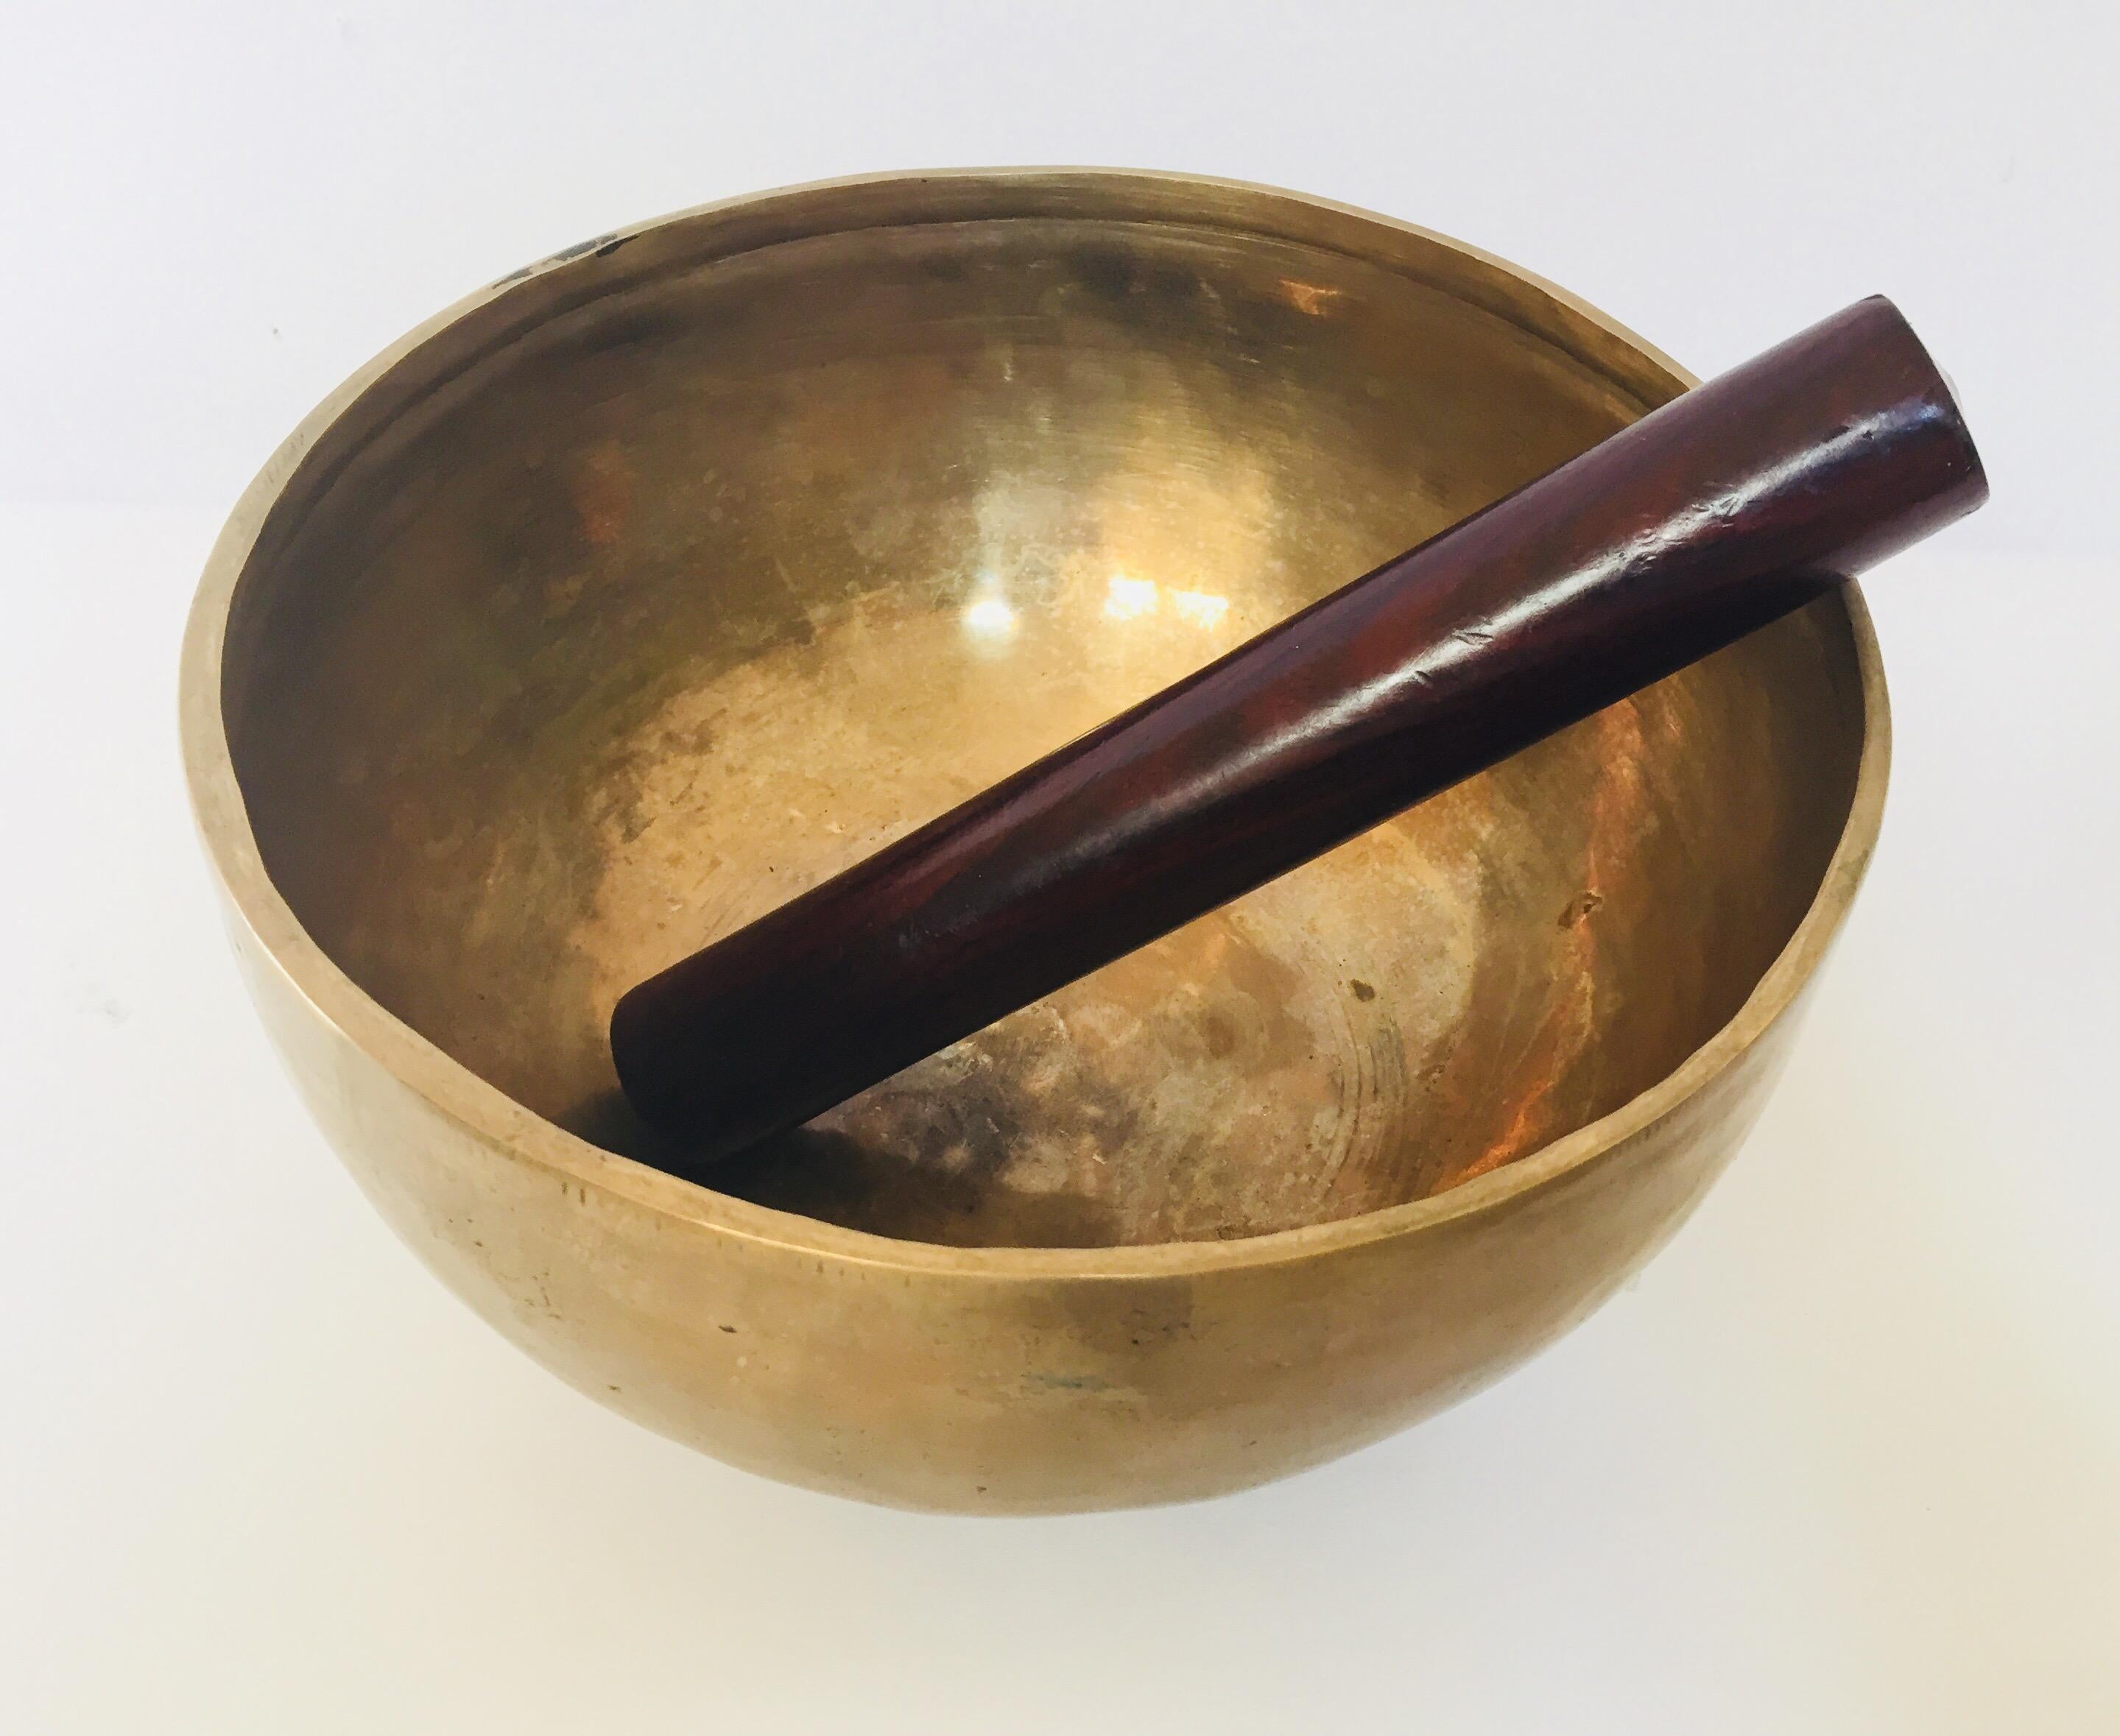 Large hand-hammered Tibetan brass bowls are used in some Buddhist religious practices to accompany periods of meditation and chanting.
They have become popular with music therapists, sound healers and yoga practitioners.
The singing bowl is used in